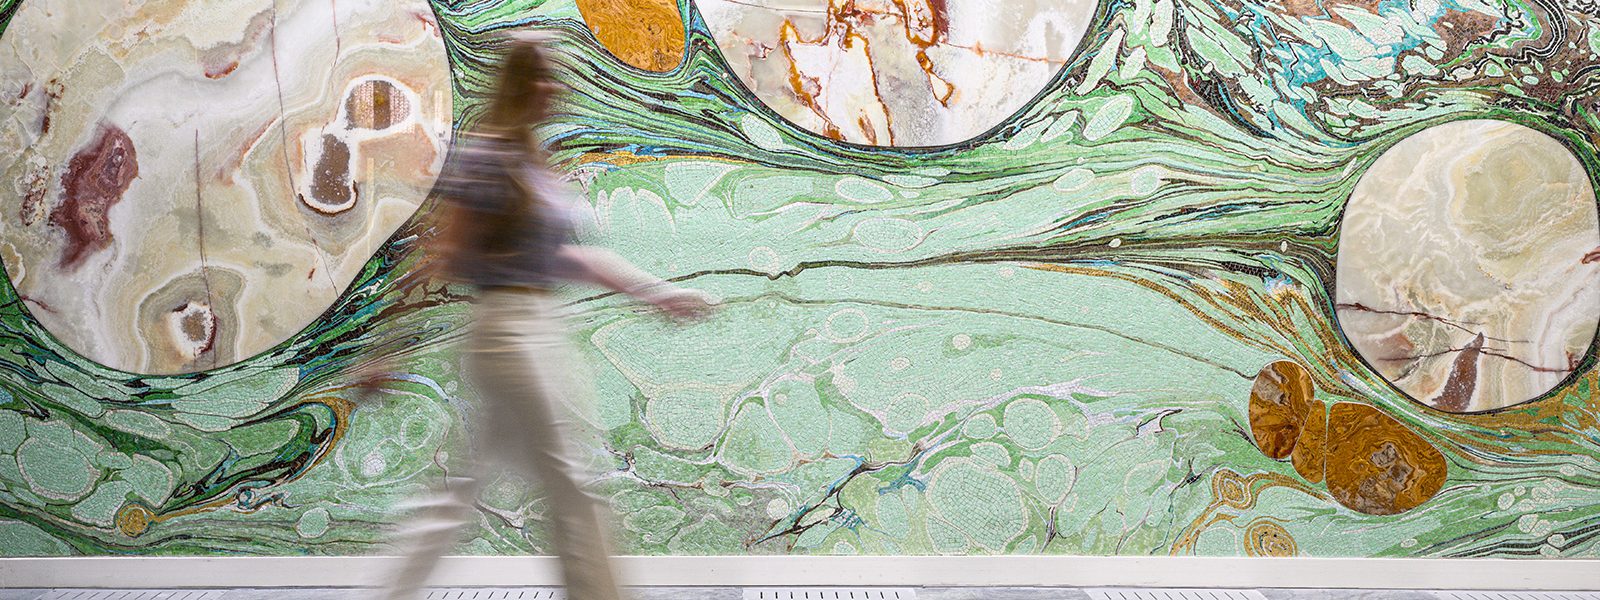 A person walks in front of a large, marbled mosaic.